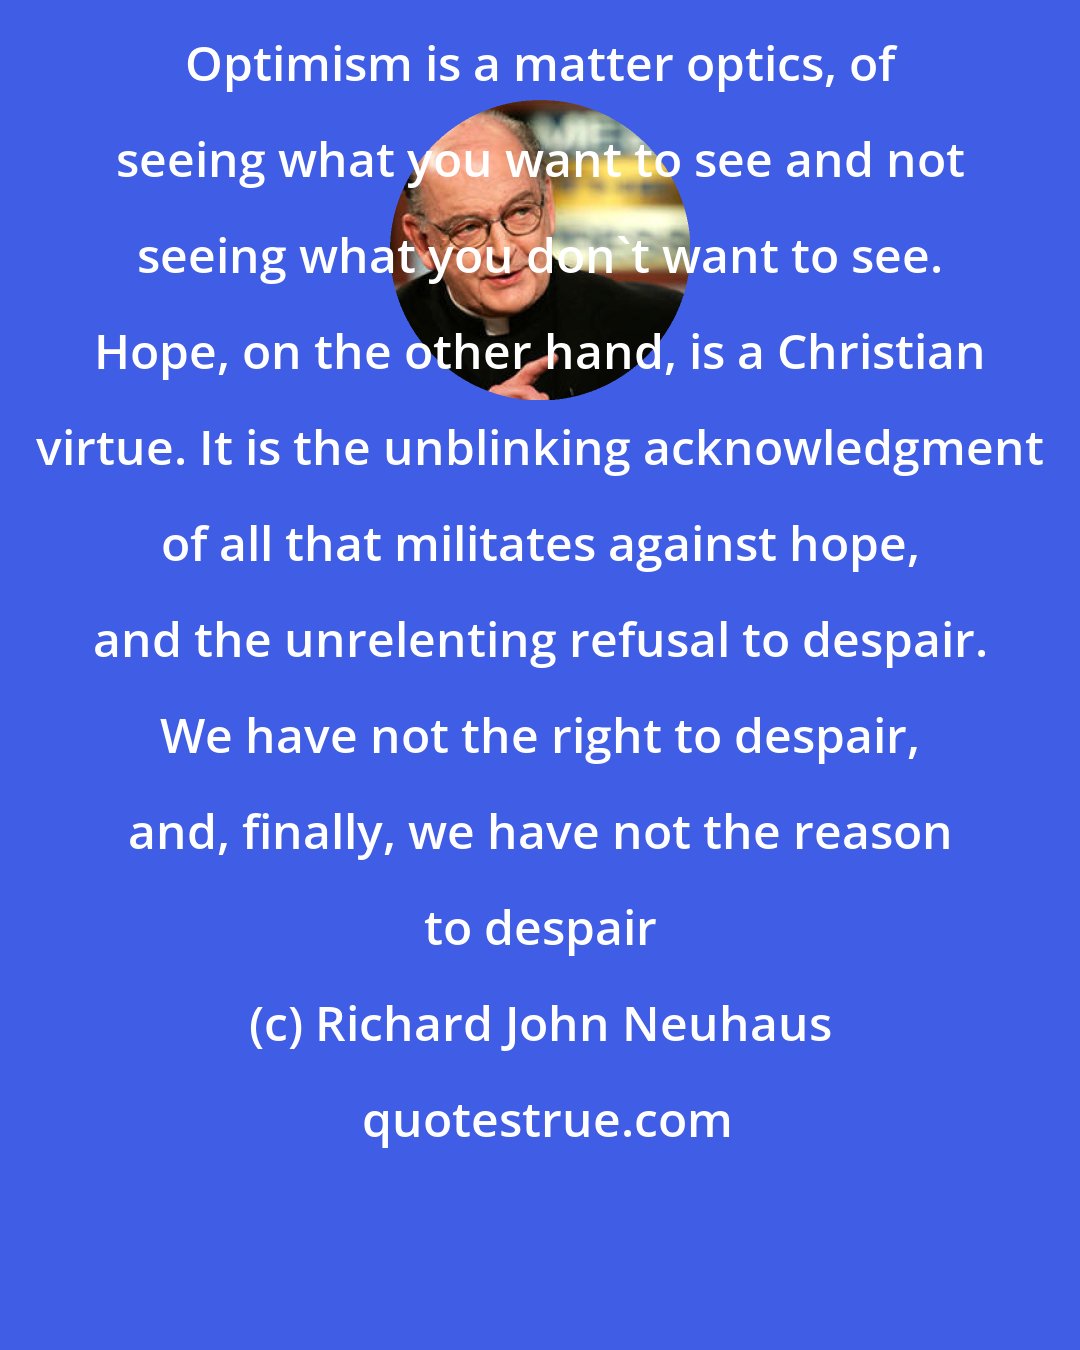 Richard John Neuhaus: Optimism is a matter optics, of seeing what you want to see and not seeing what you don't want to see. Hope, on the other hand, is a Christian virtue. It is the unblinking acknowledgment of all that militates against hope, and the unrelenting refusal to despair. We have not the right to despair, and, finally, we have not the reason to despair